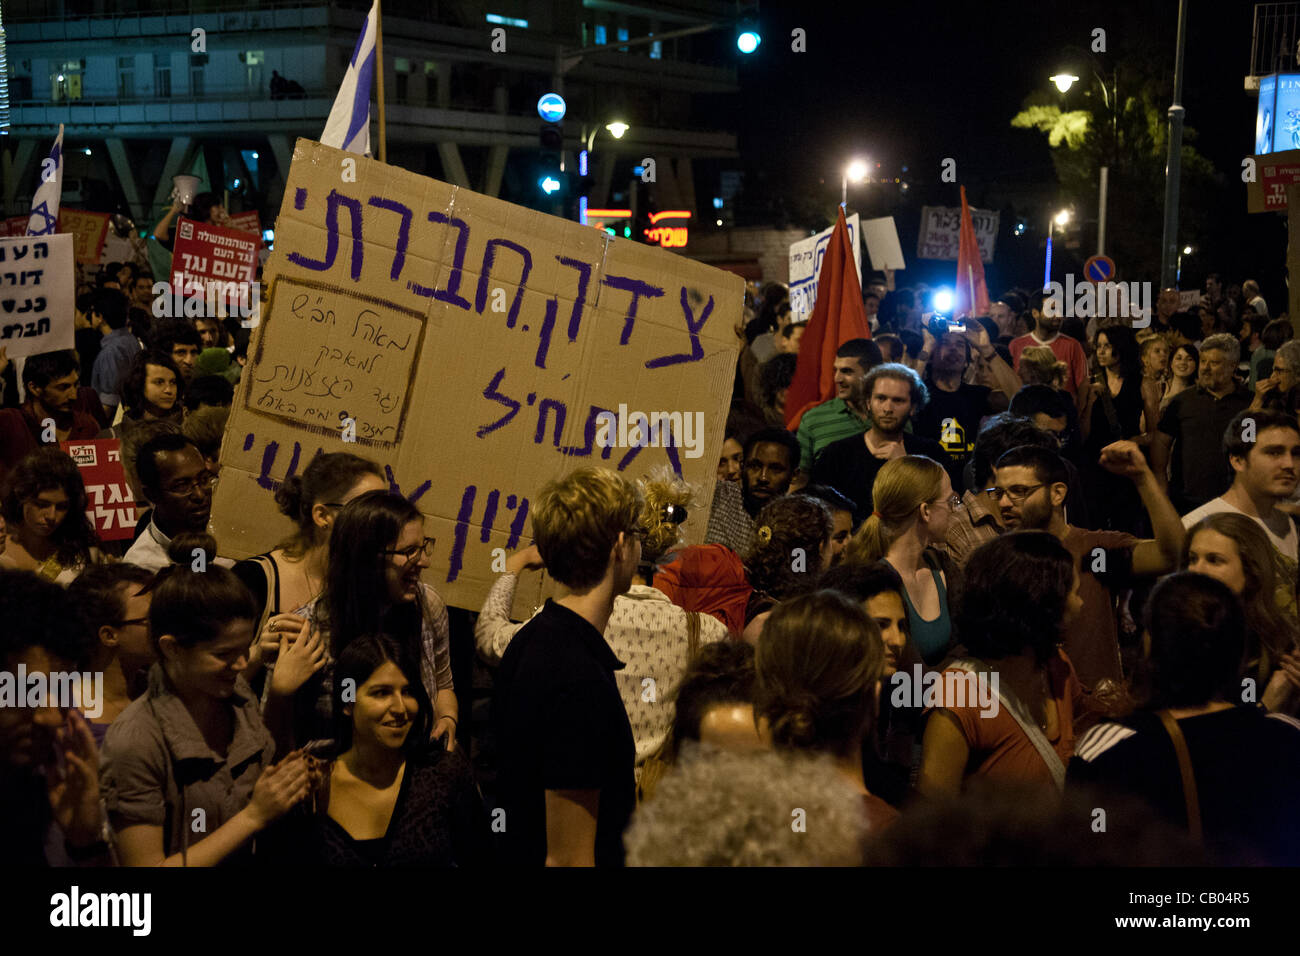 Protesters chant “The nations demands social justice!” recycling successful mottos of the 2011 summer social protests. Jerusalem, Israel. 12-May-2012. Stock Photo